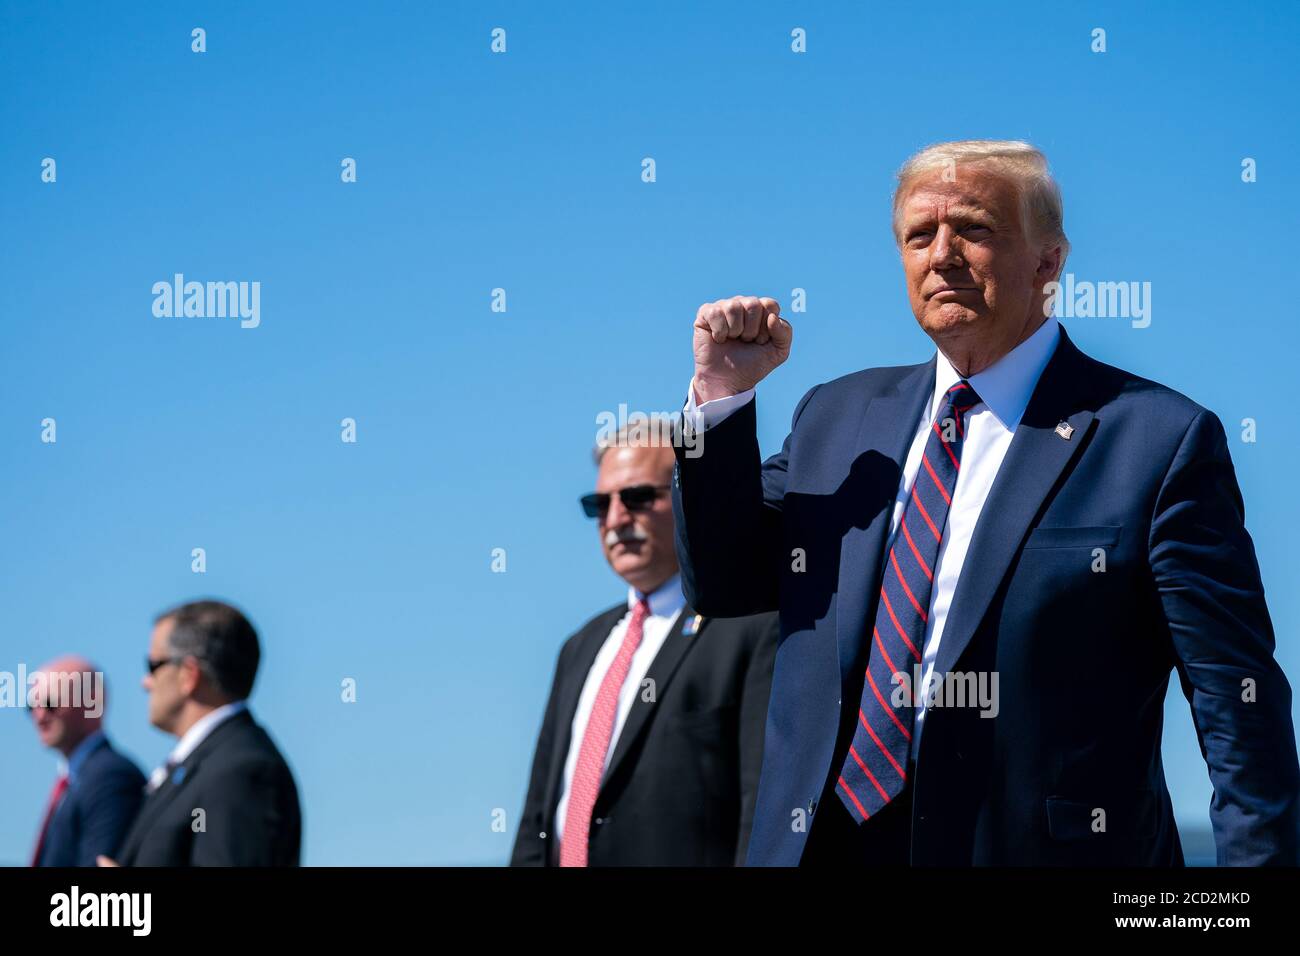 AVOCA, PA, USA - 20 August 2020 - US President Donald J. Trump gestures with a fist-pump as he disembarks Air Force One at Wilkes-Barre Scranton Inter Stock Photo